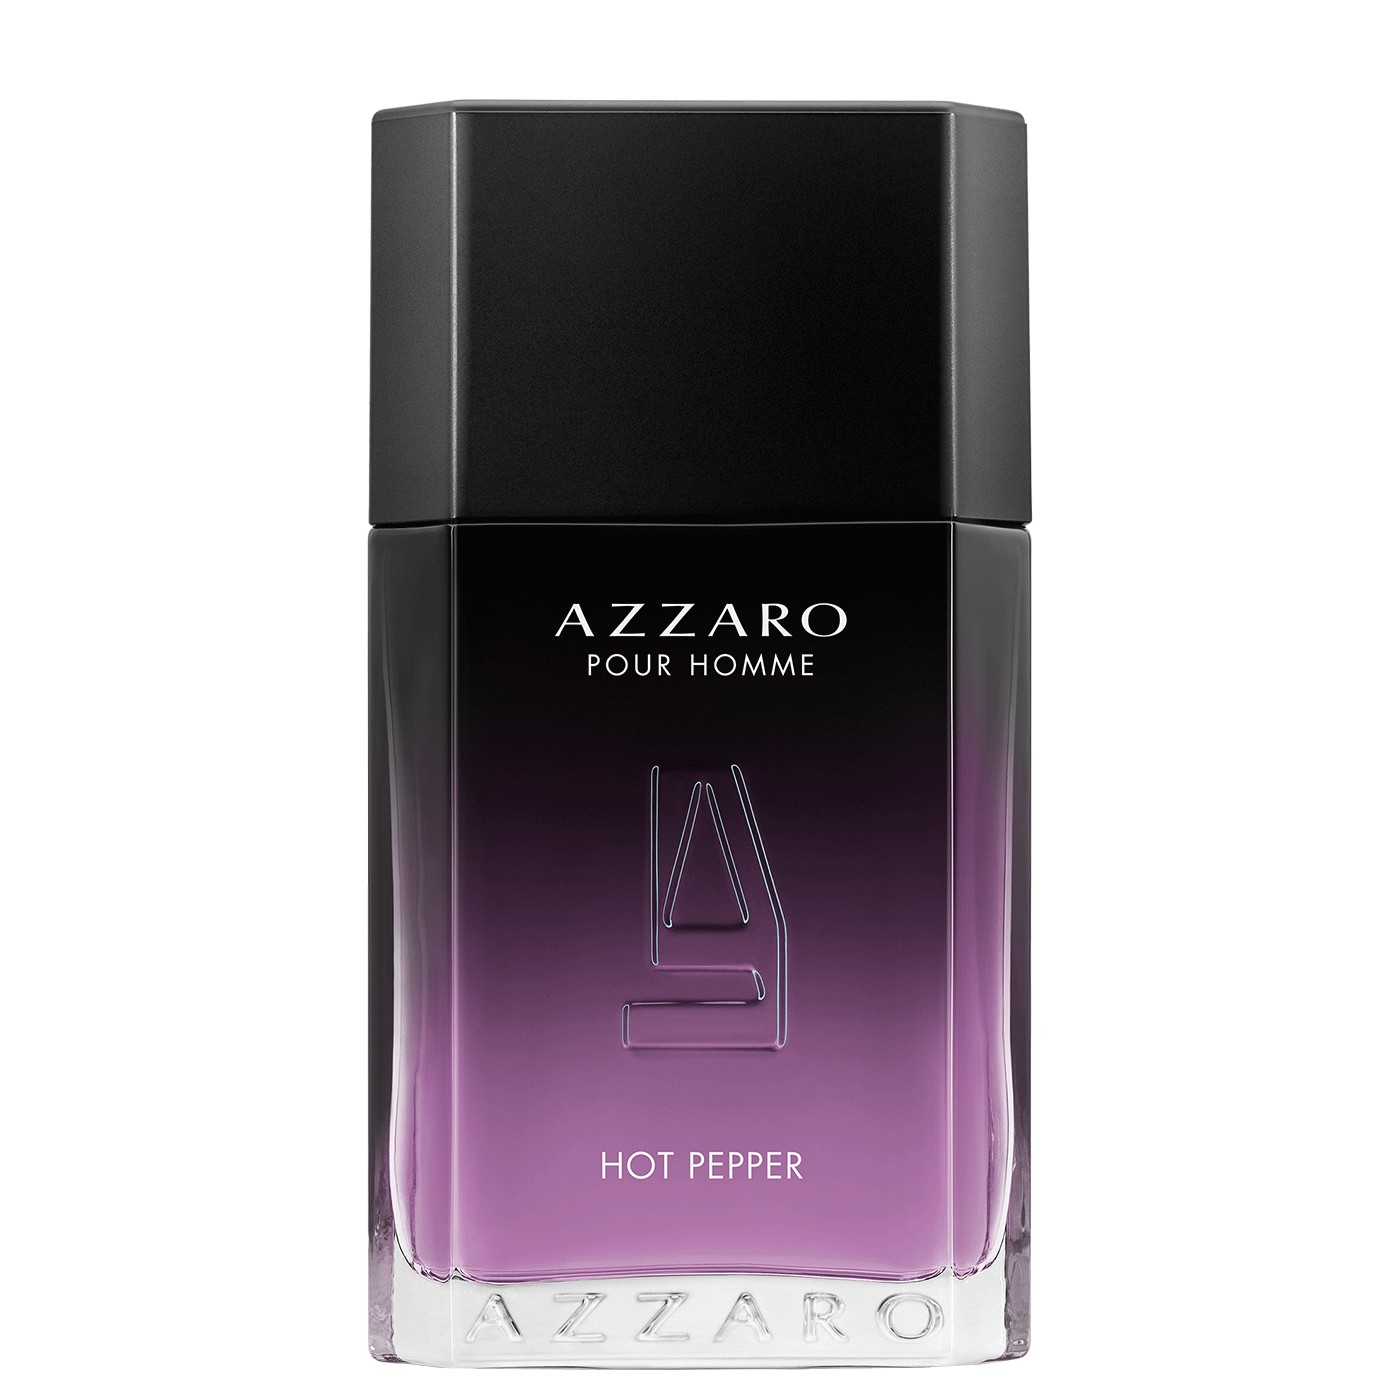 AZZARO HOT PEPPER POUR HOMME